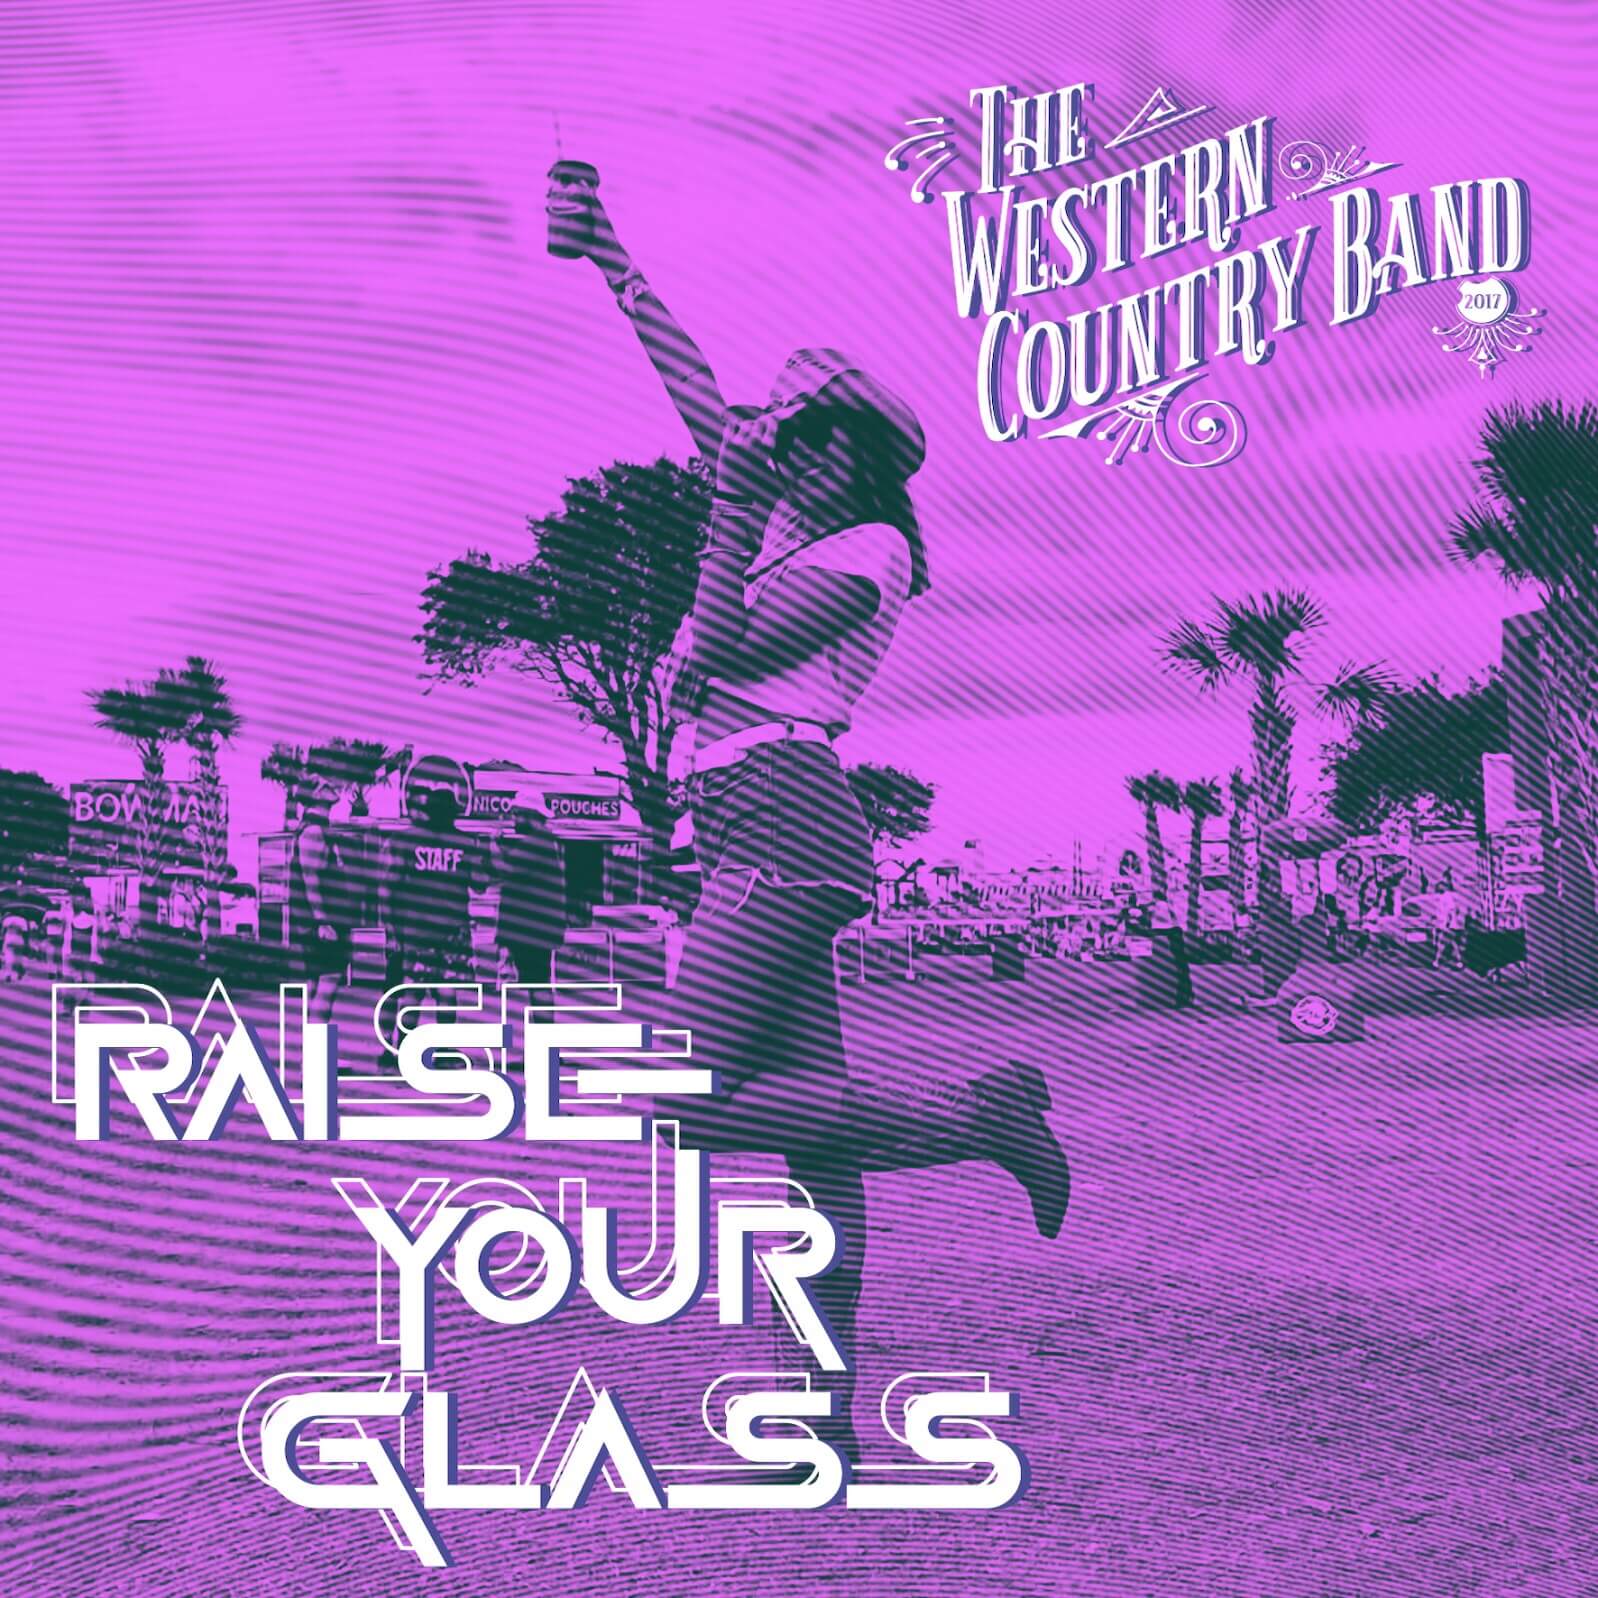 The Western Country Band - Raise Your Glass